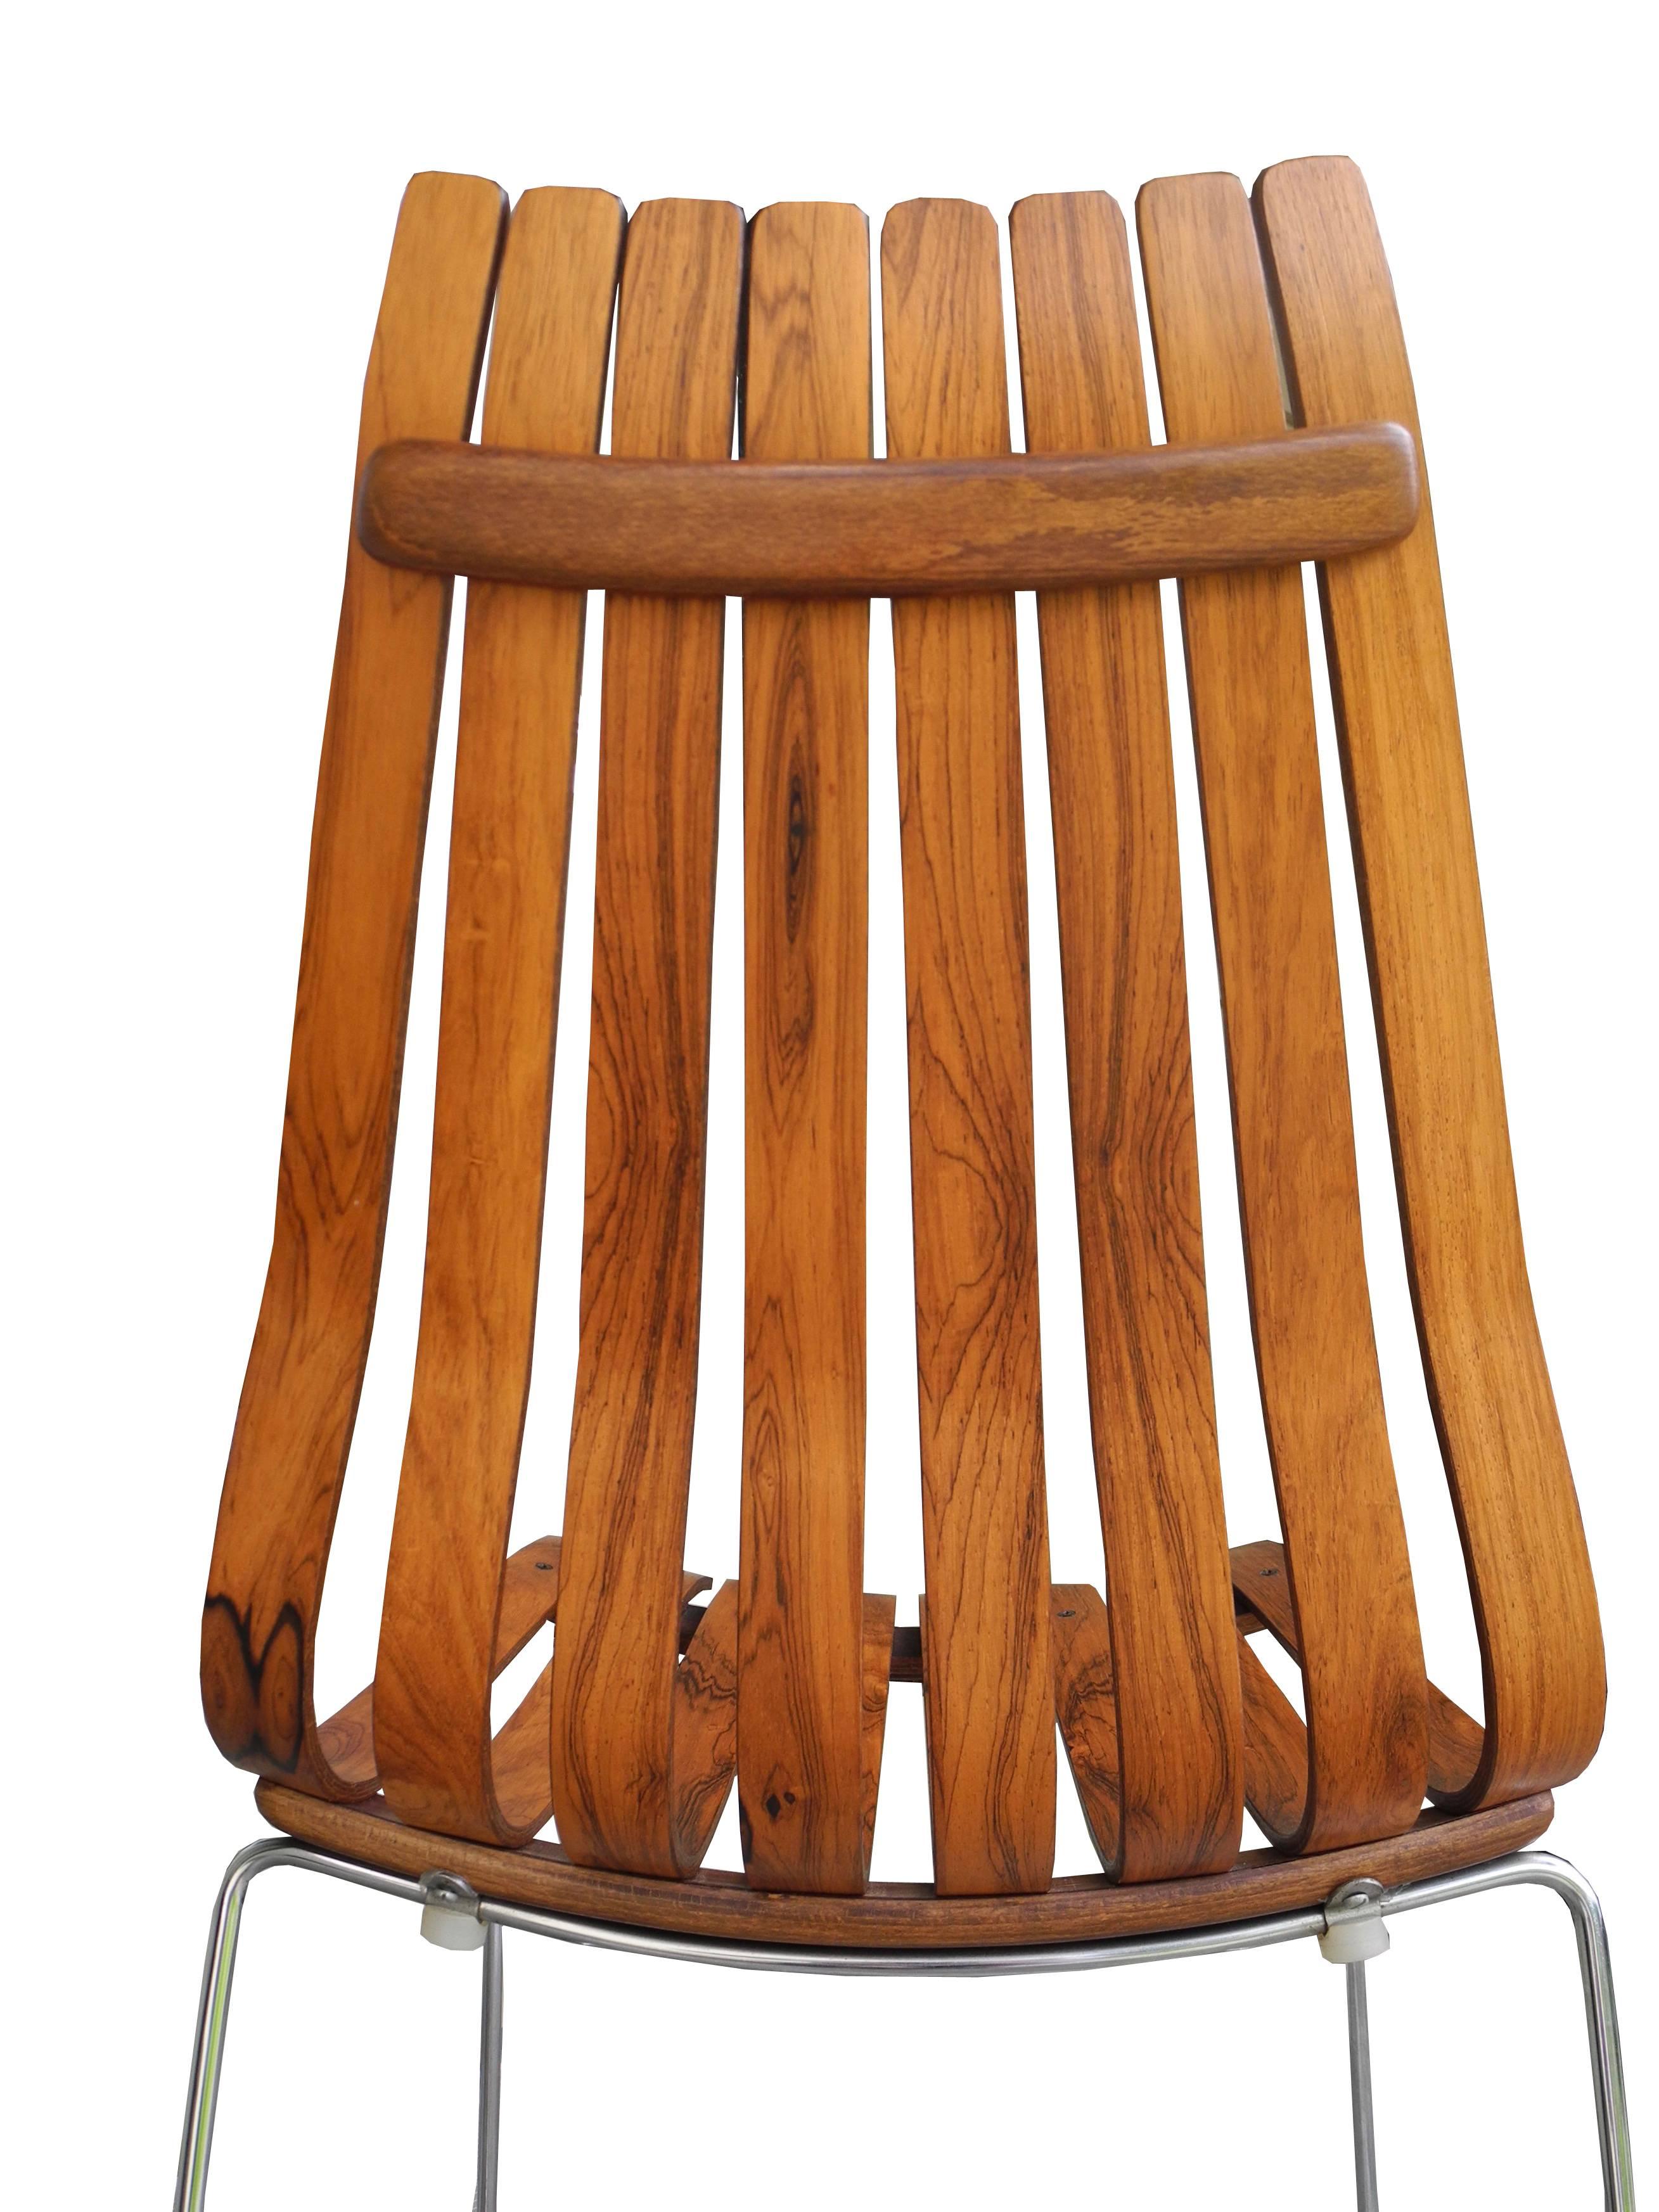 Single Rosewood Slatted Norwegian Chair by Hans Brattrud for Hove Mobler In Excellent Condition For Sale In Hudson, NY